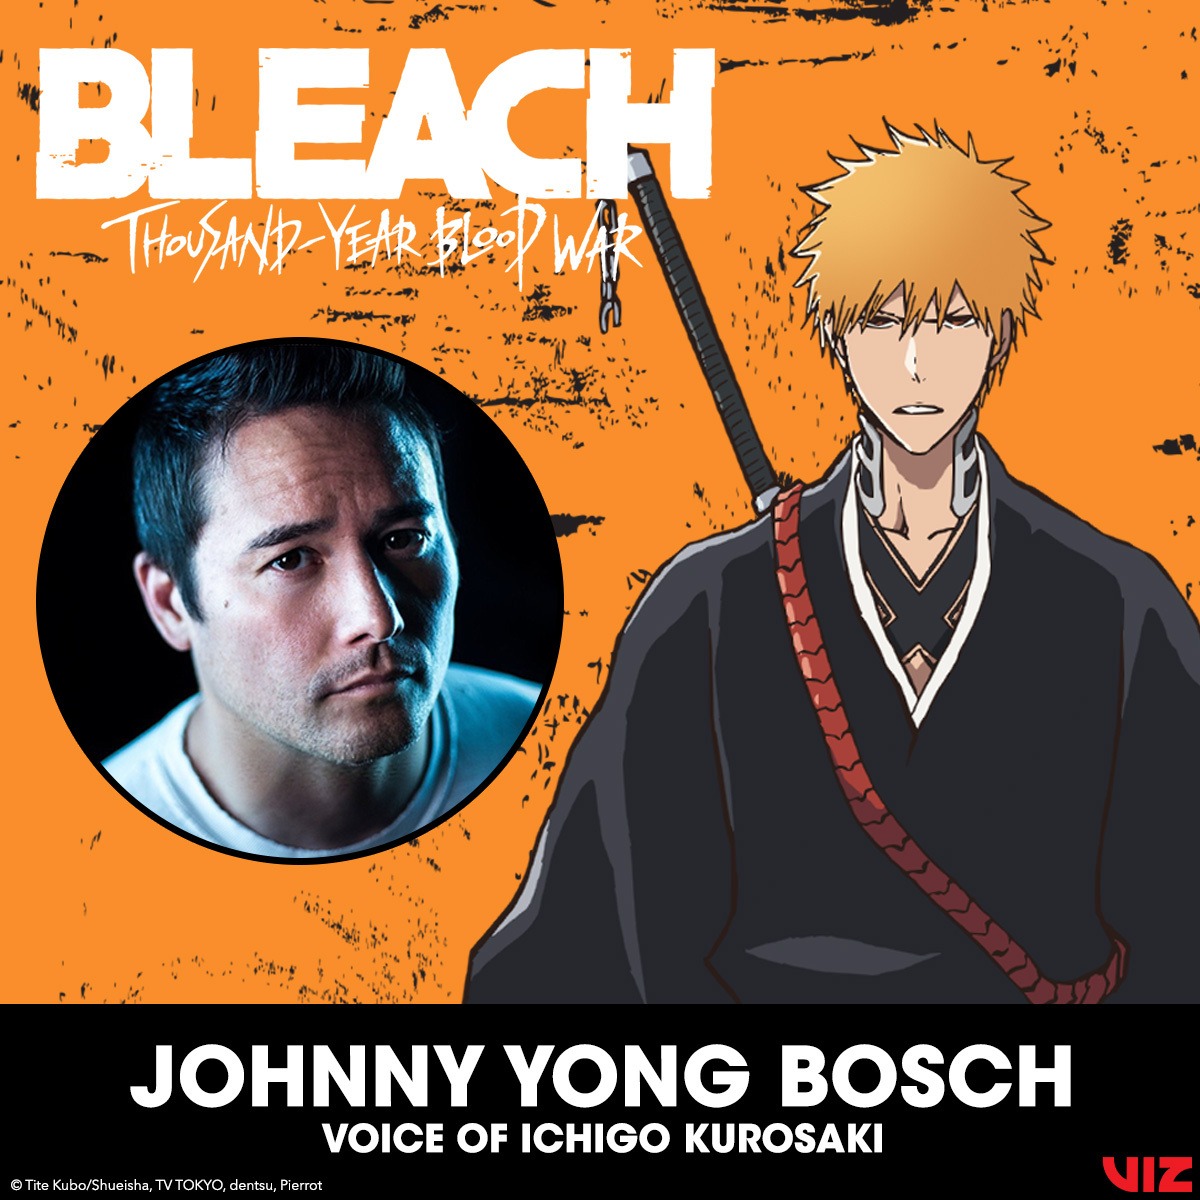 I have to pinch myself constantly: Ichigo Voice Actor Reveals the  Thousand-Year Blood War Episode That Completes Bleach - FandomWire